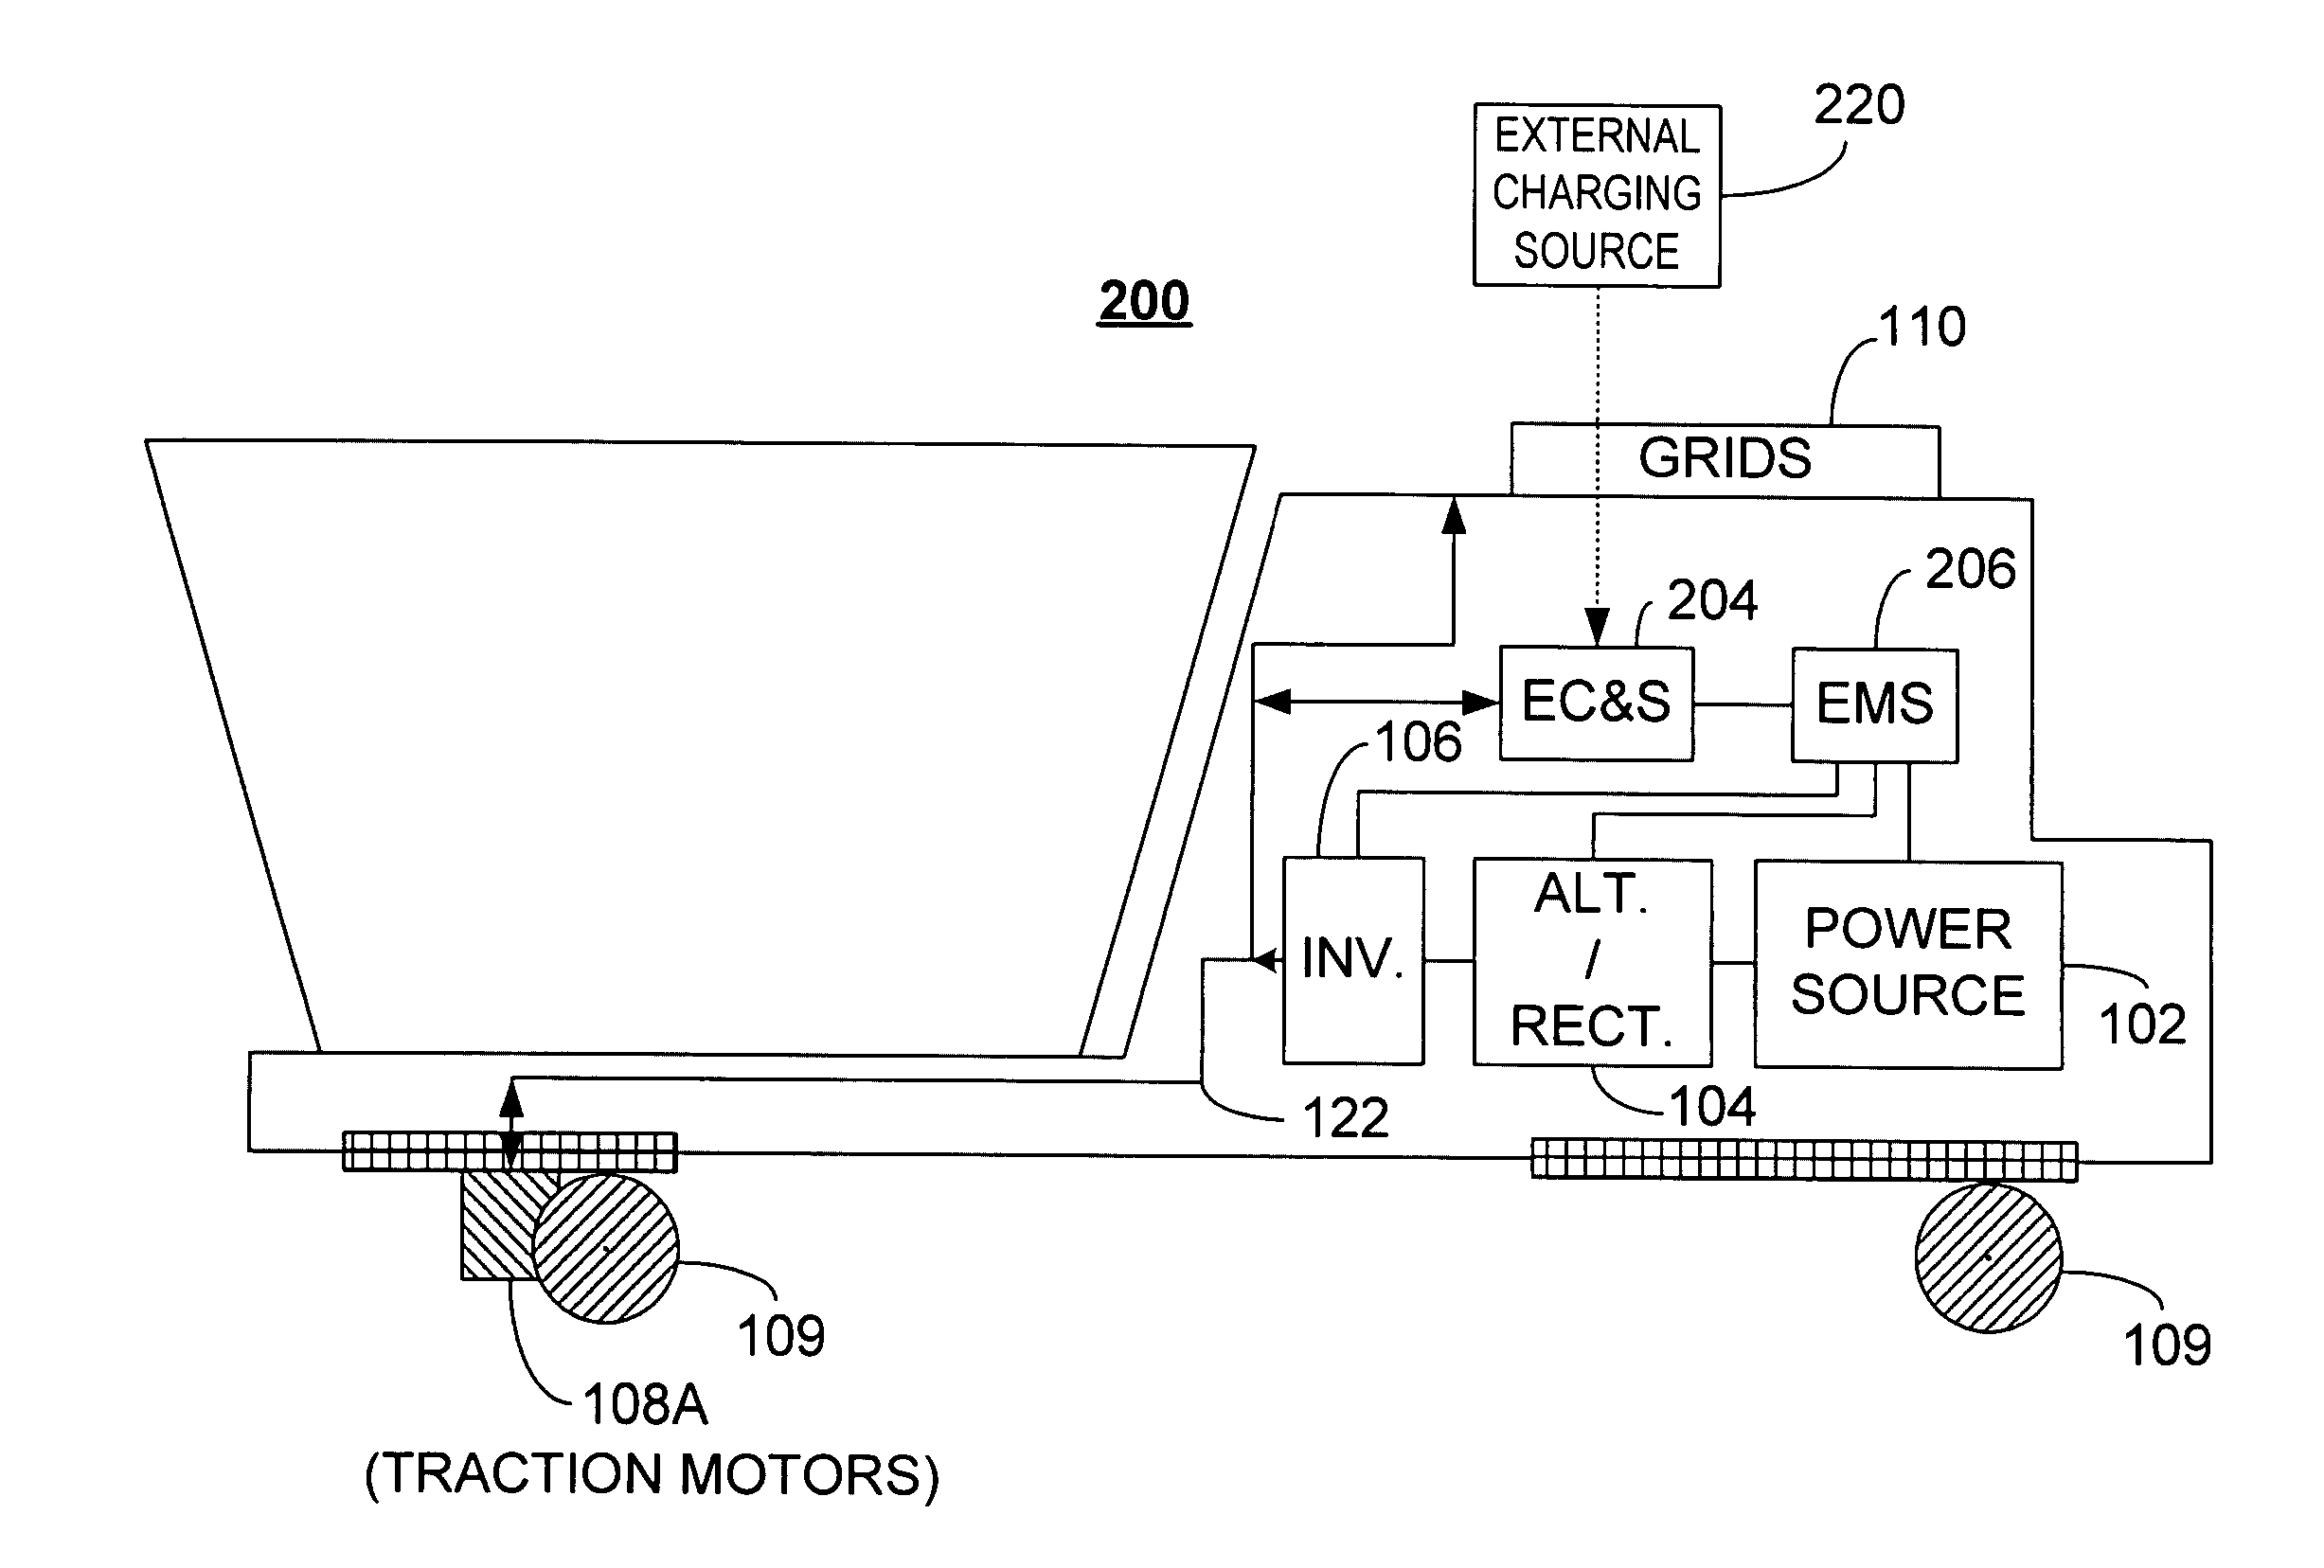 Hybrid energy off highway vehicle load control system and method